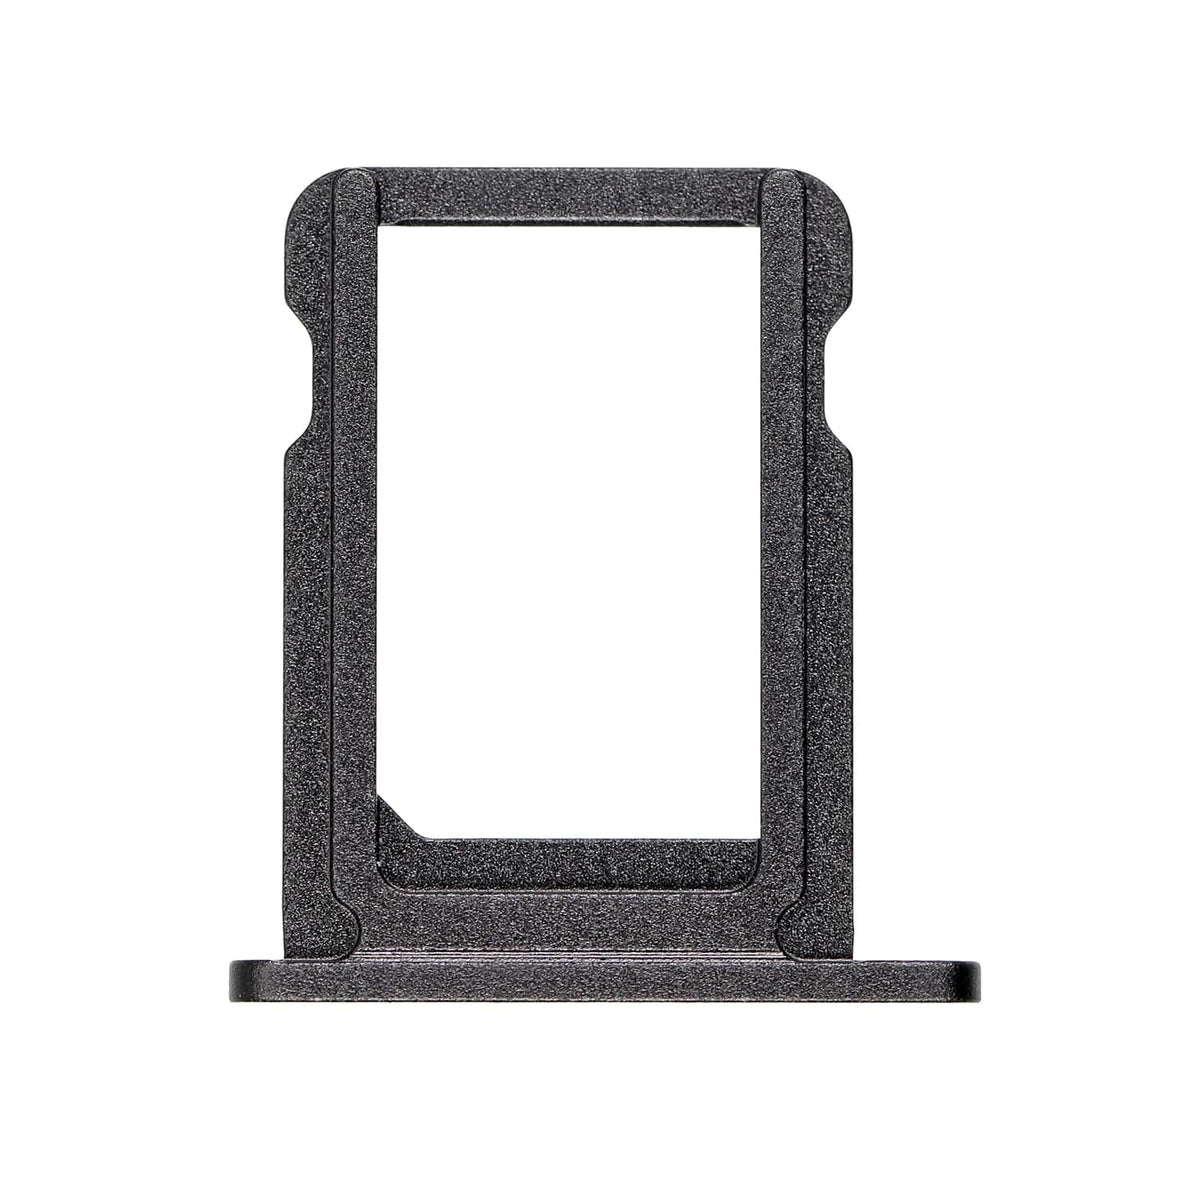 SIM CARD TRAY FOR IPAD PRO 11" 2ND GEN - GRAY